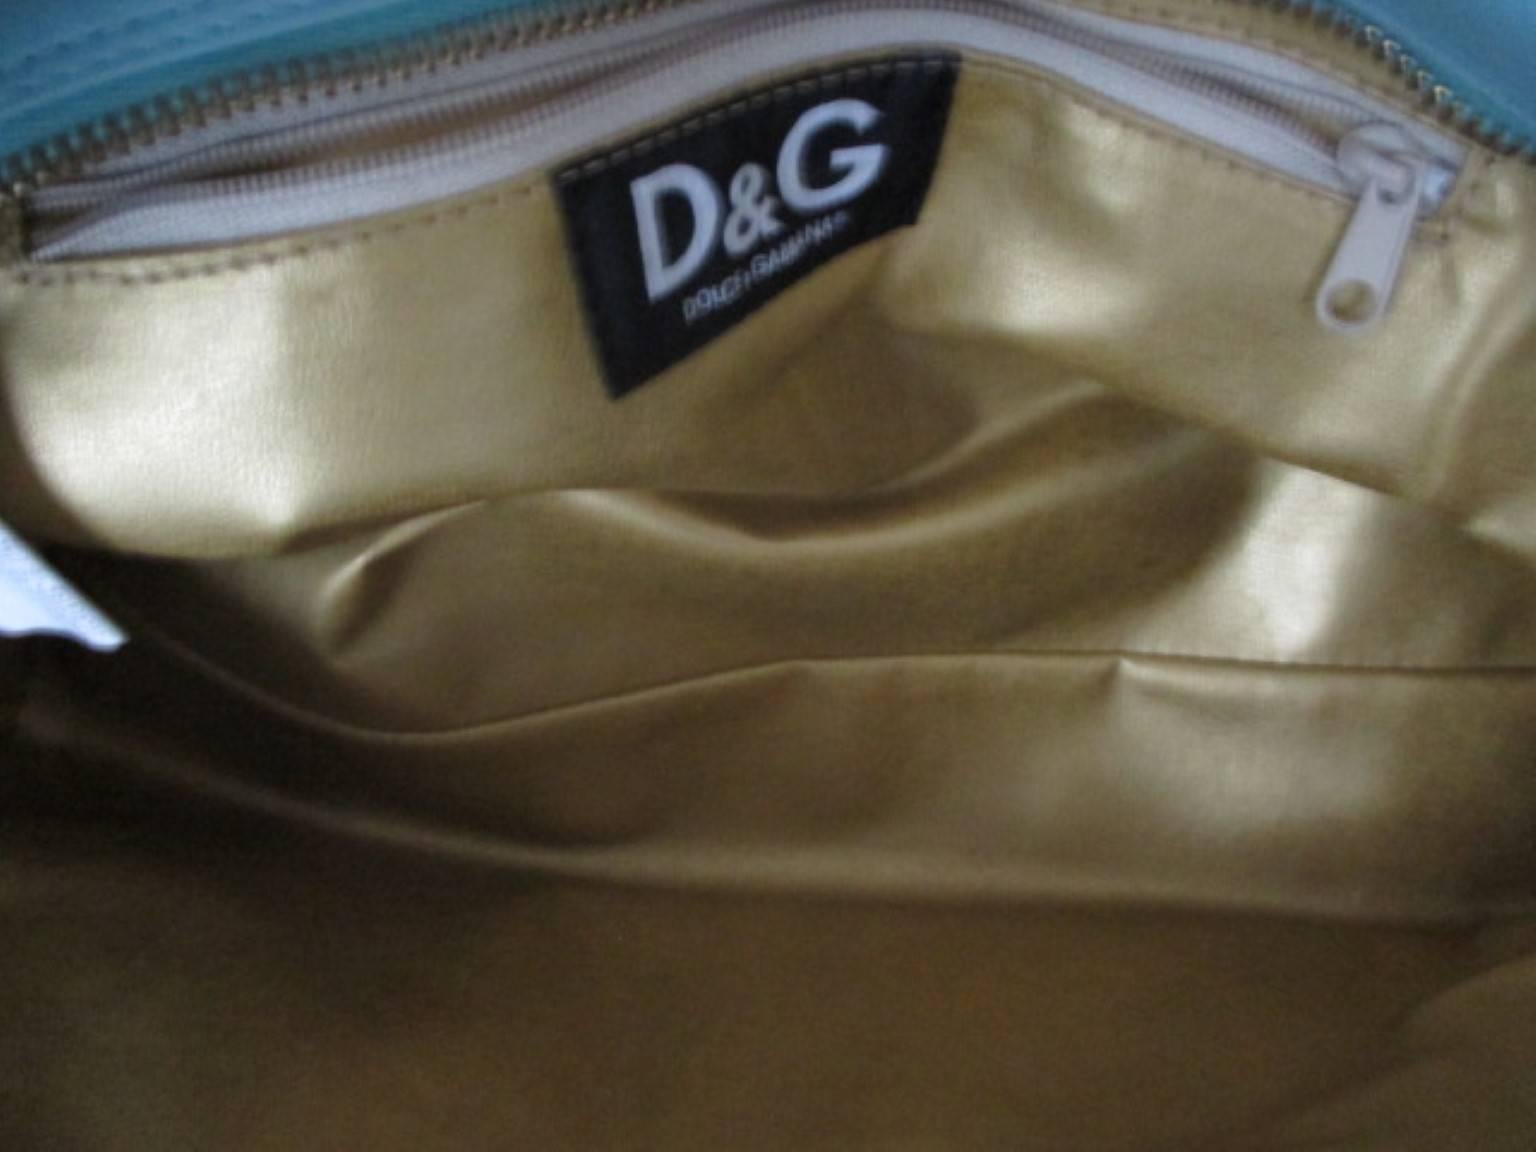 Dolce & Gabbana Turquoise Leather Shoulder Bag In Excellent Condition For Sale In Amsterdam, NL